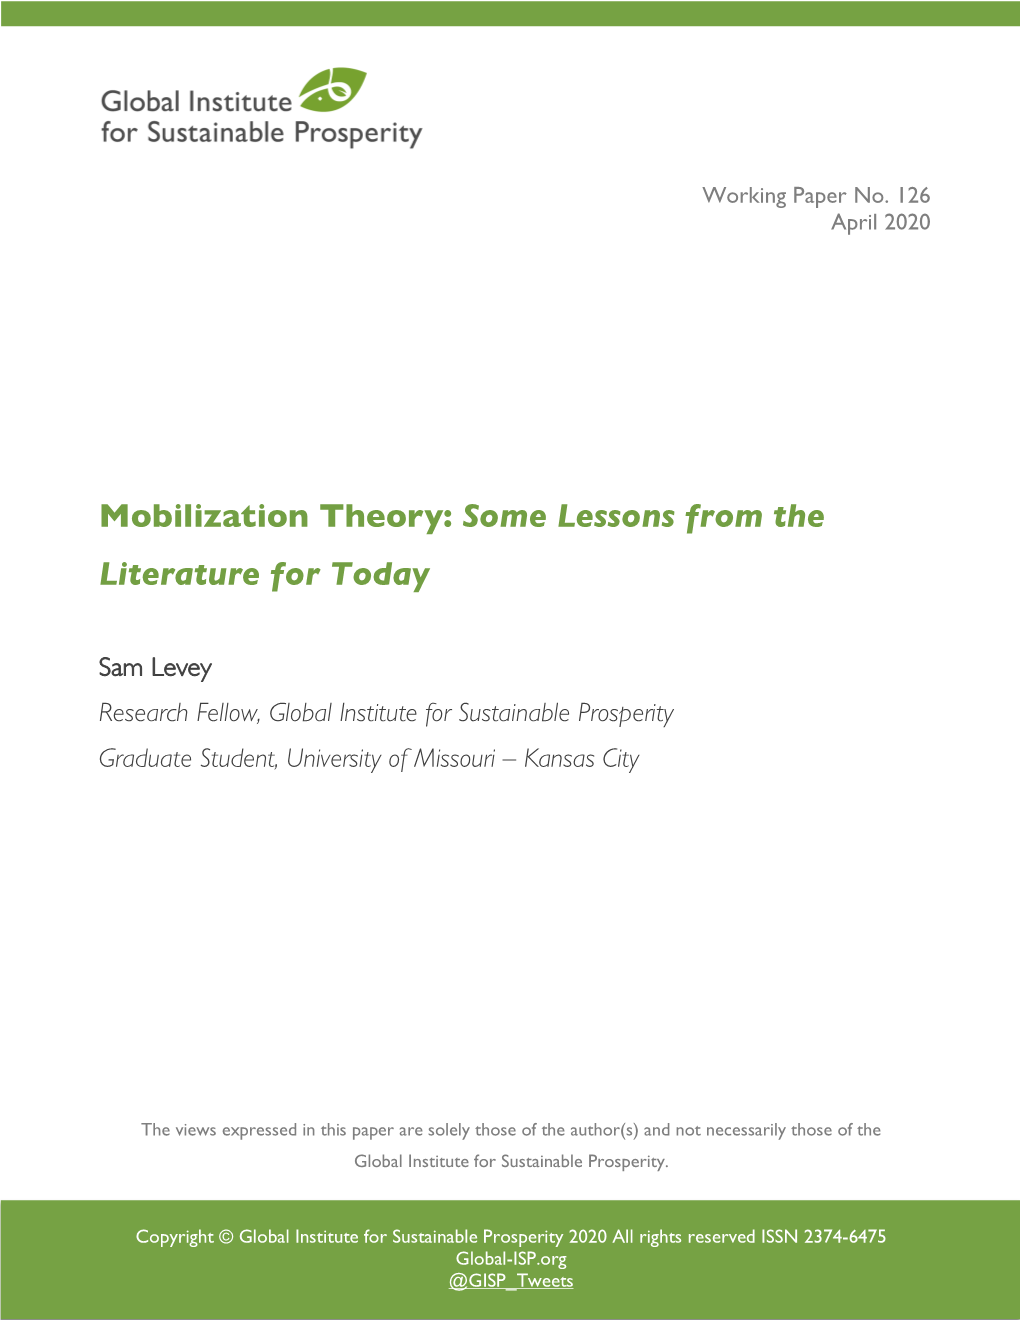 Mobilization Theory: Some Lessons from the Literature for Today